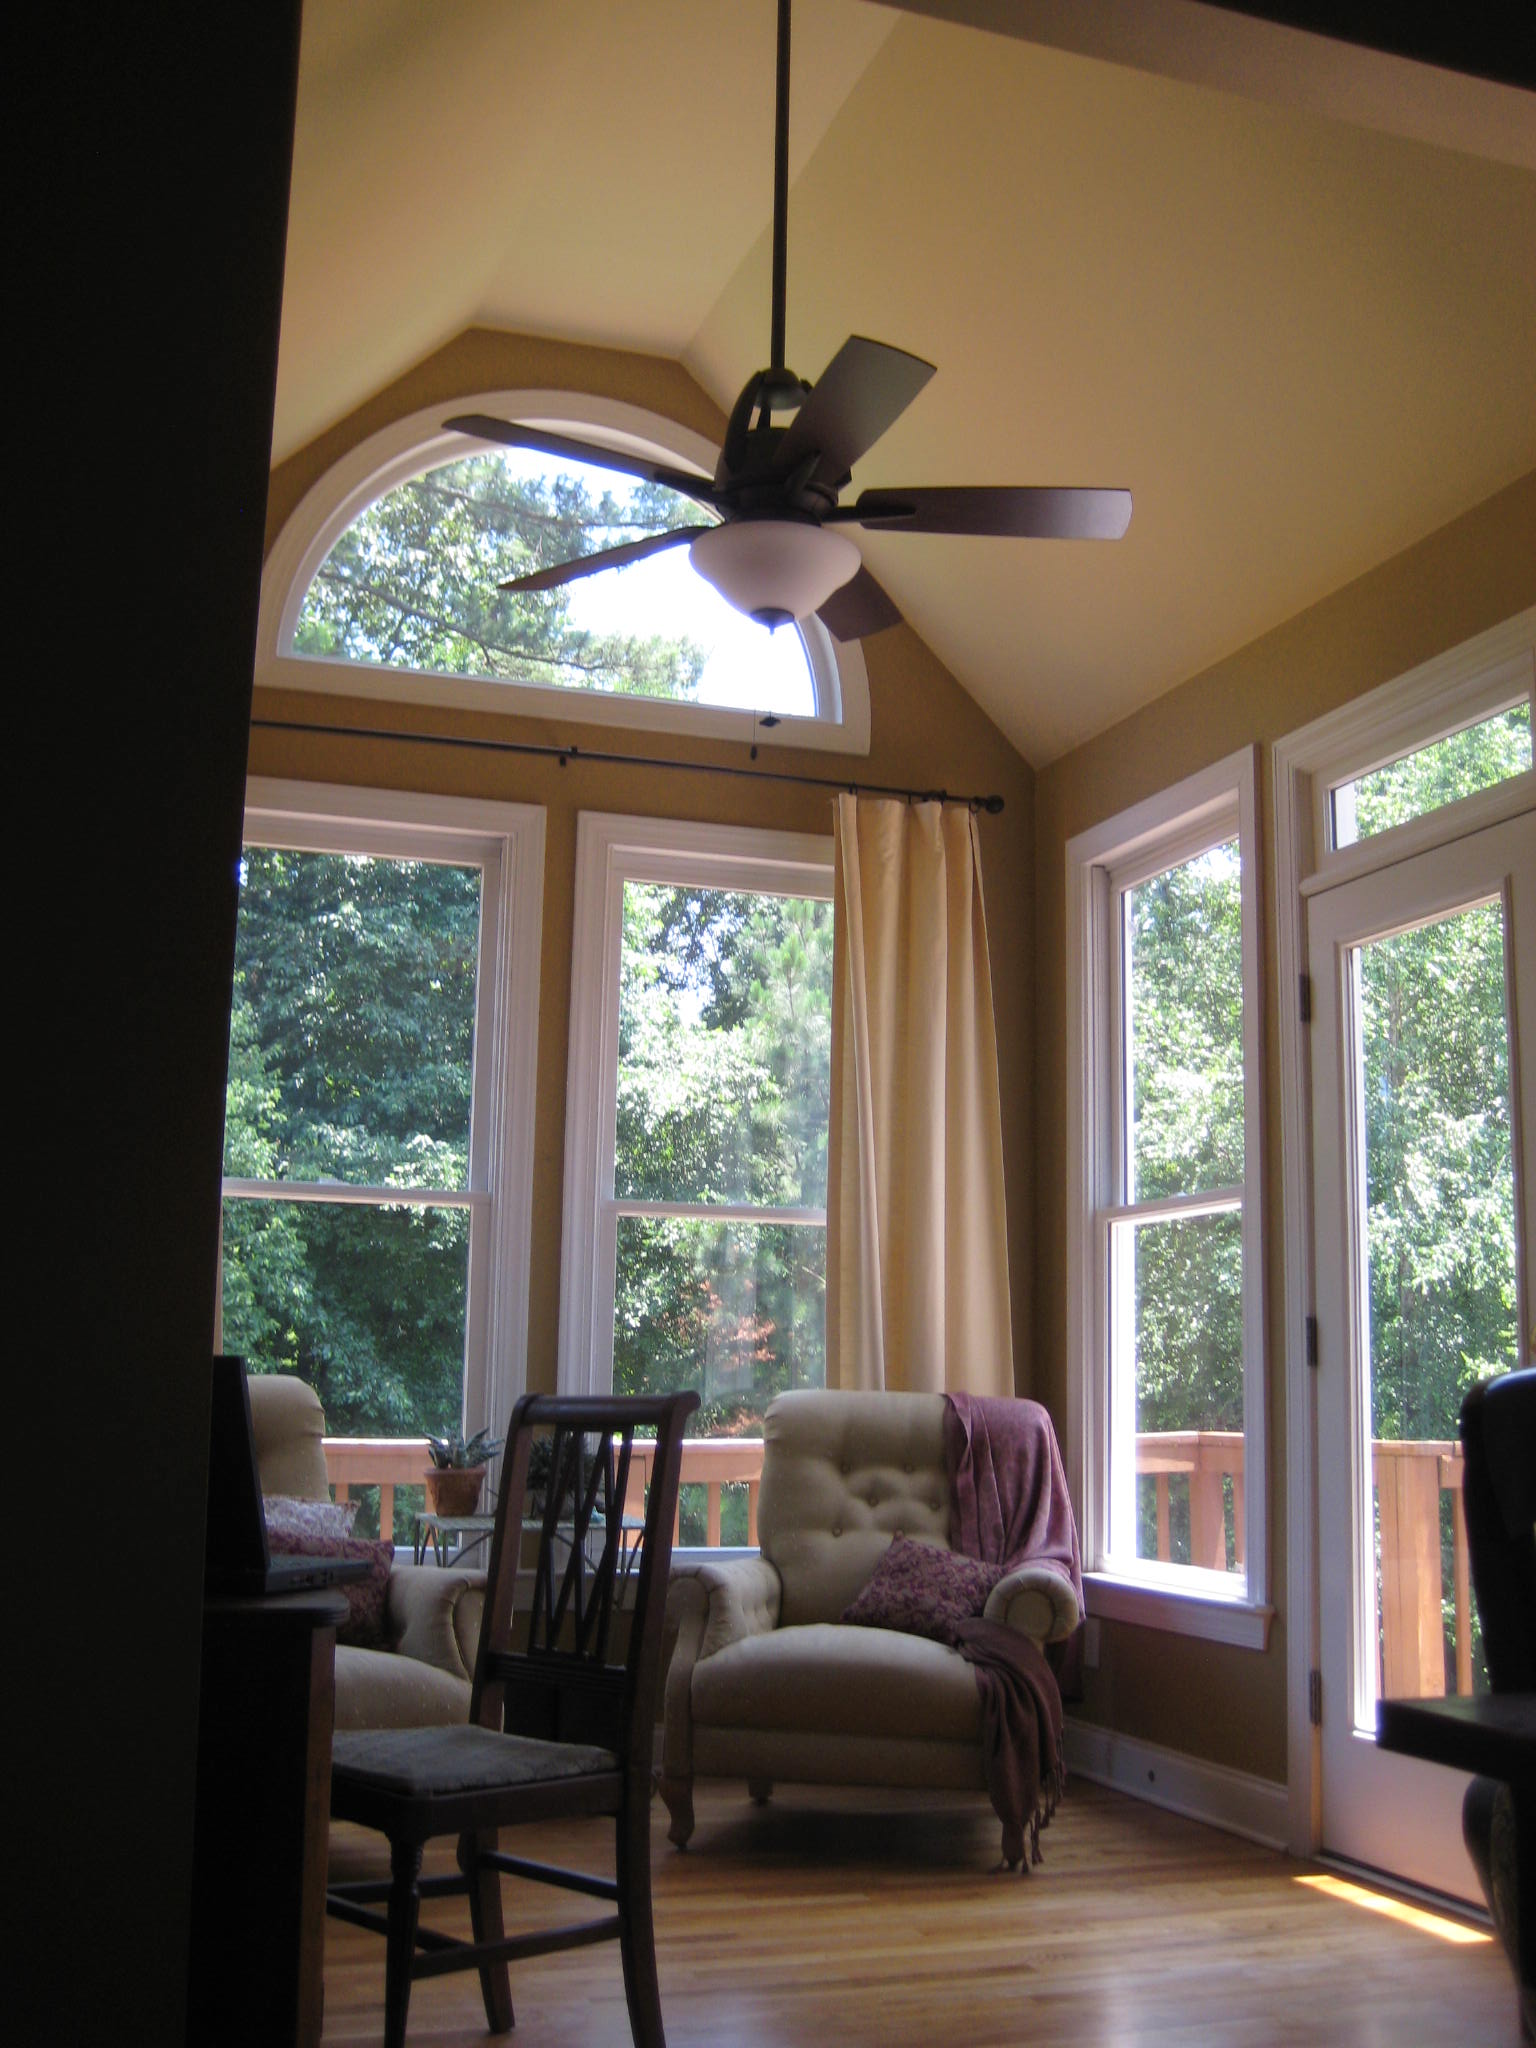 Cool off with updated ceiling fan.